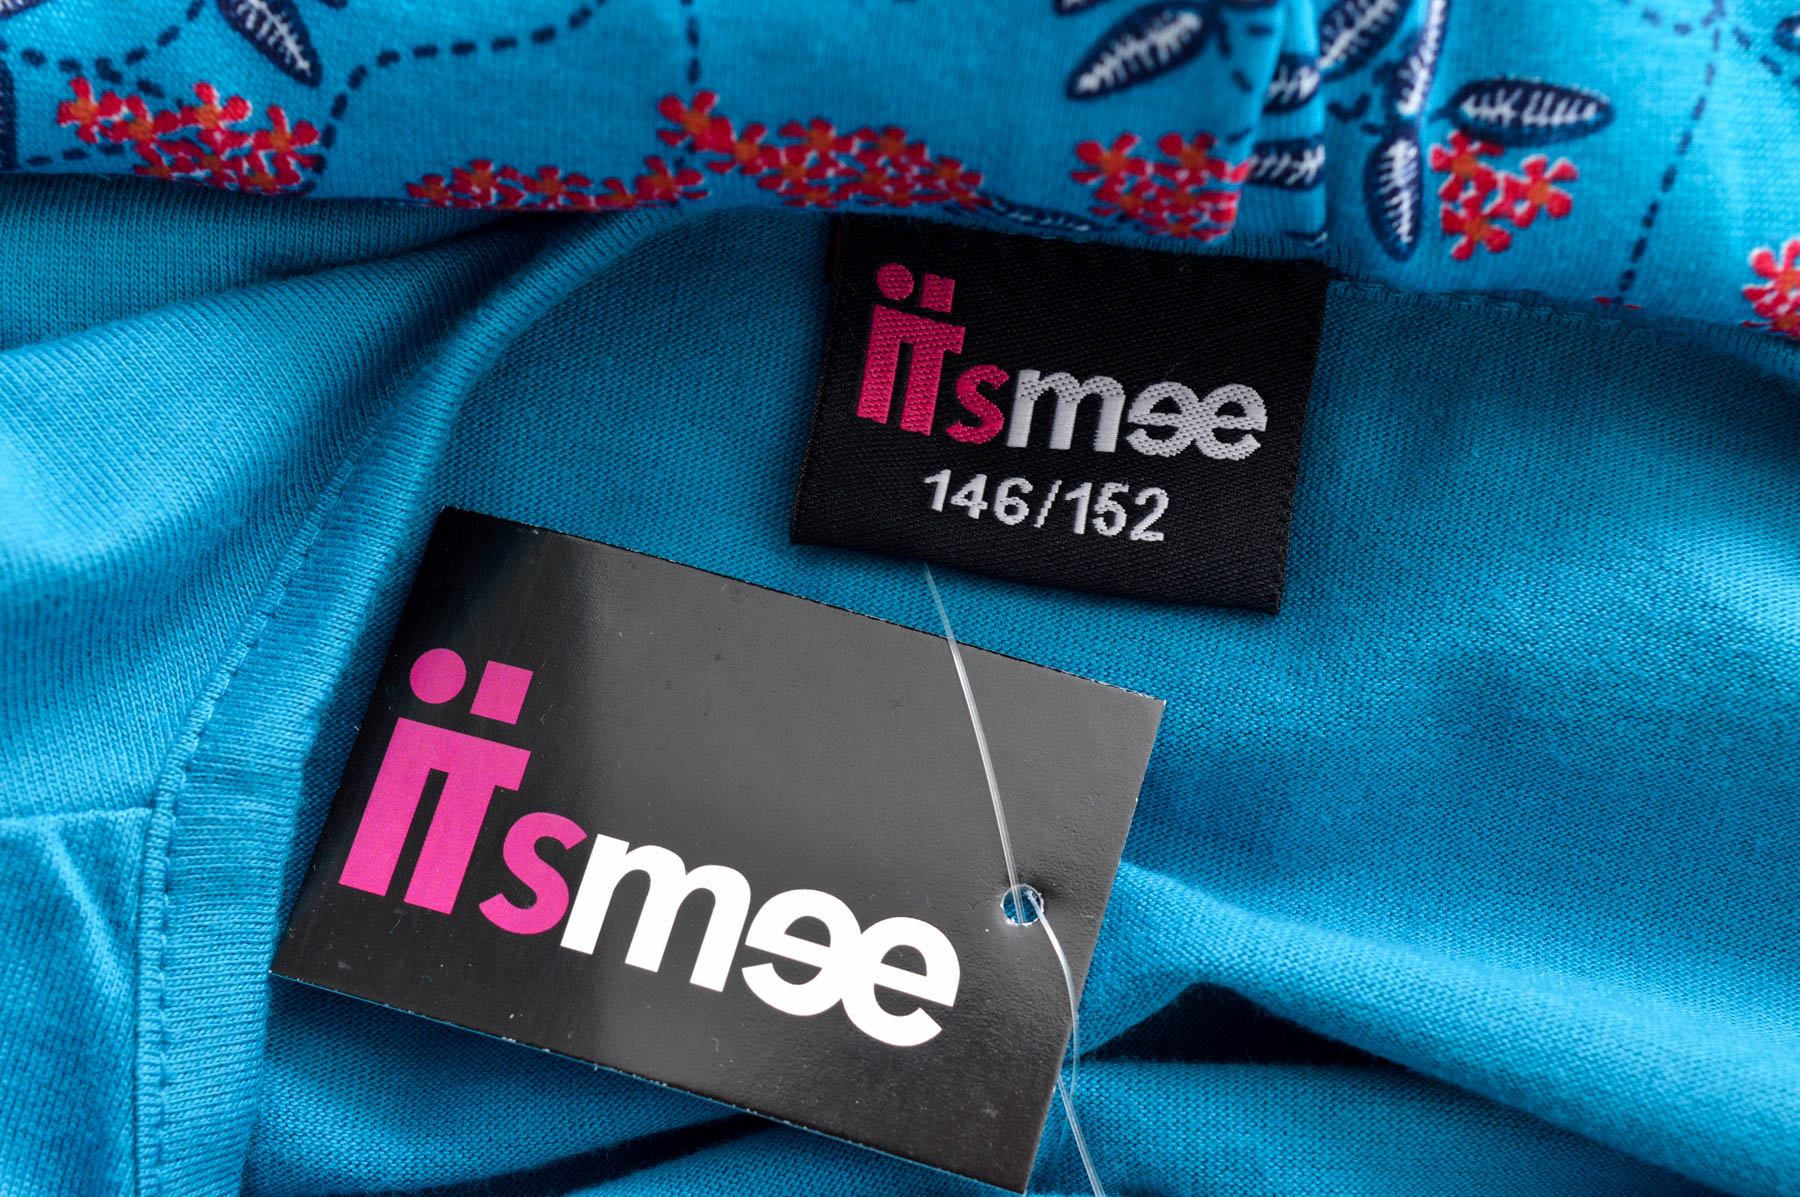 Pajamas for girls - IT's mee - 2